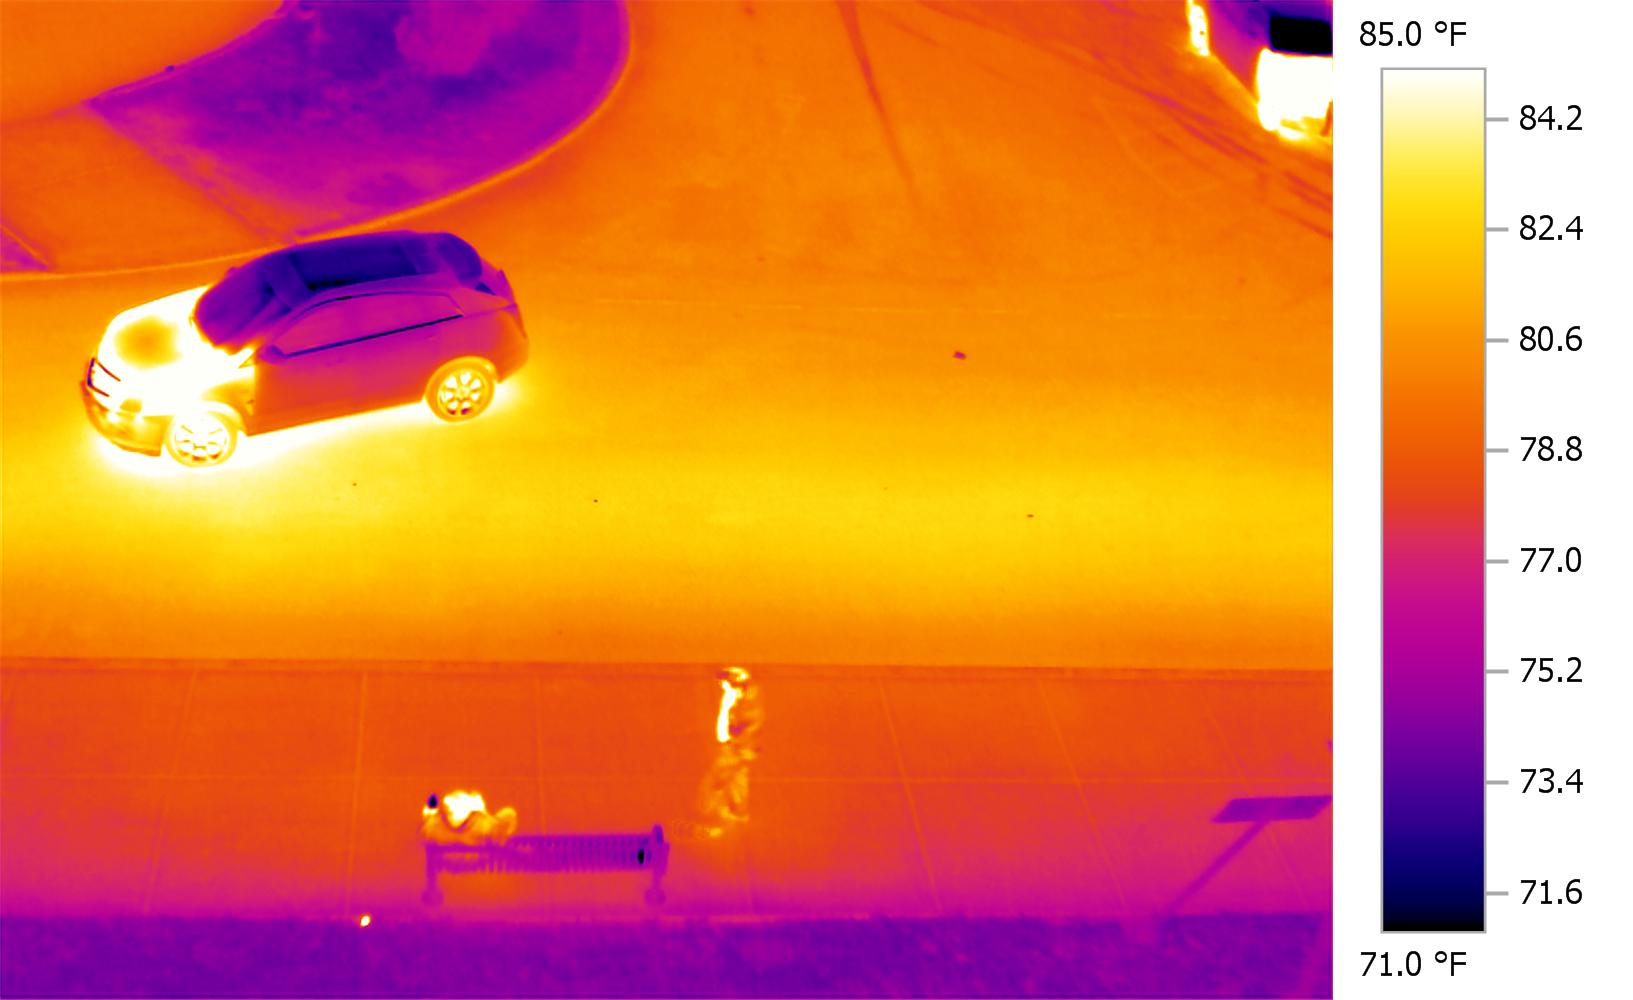 Infrared Inspection Services of Underground Steam or Liquid Pipe leaks.